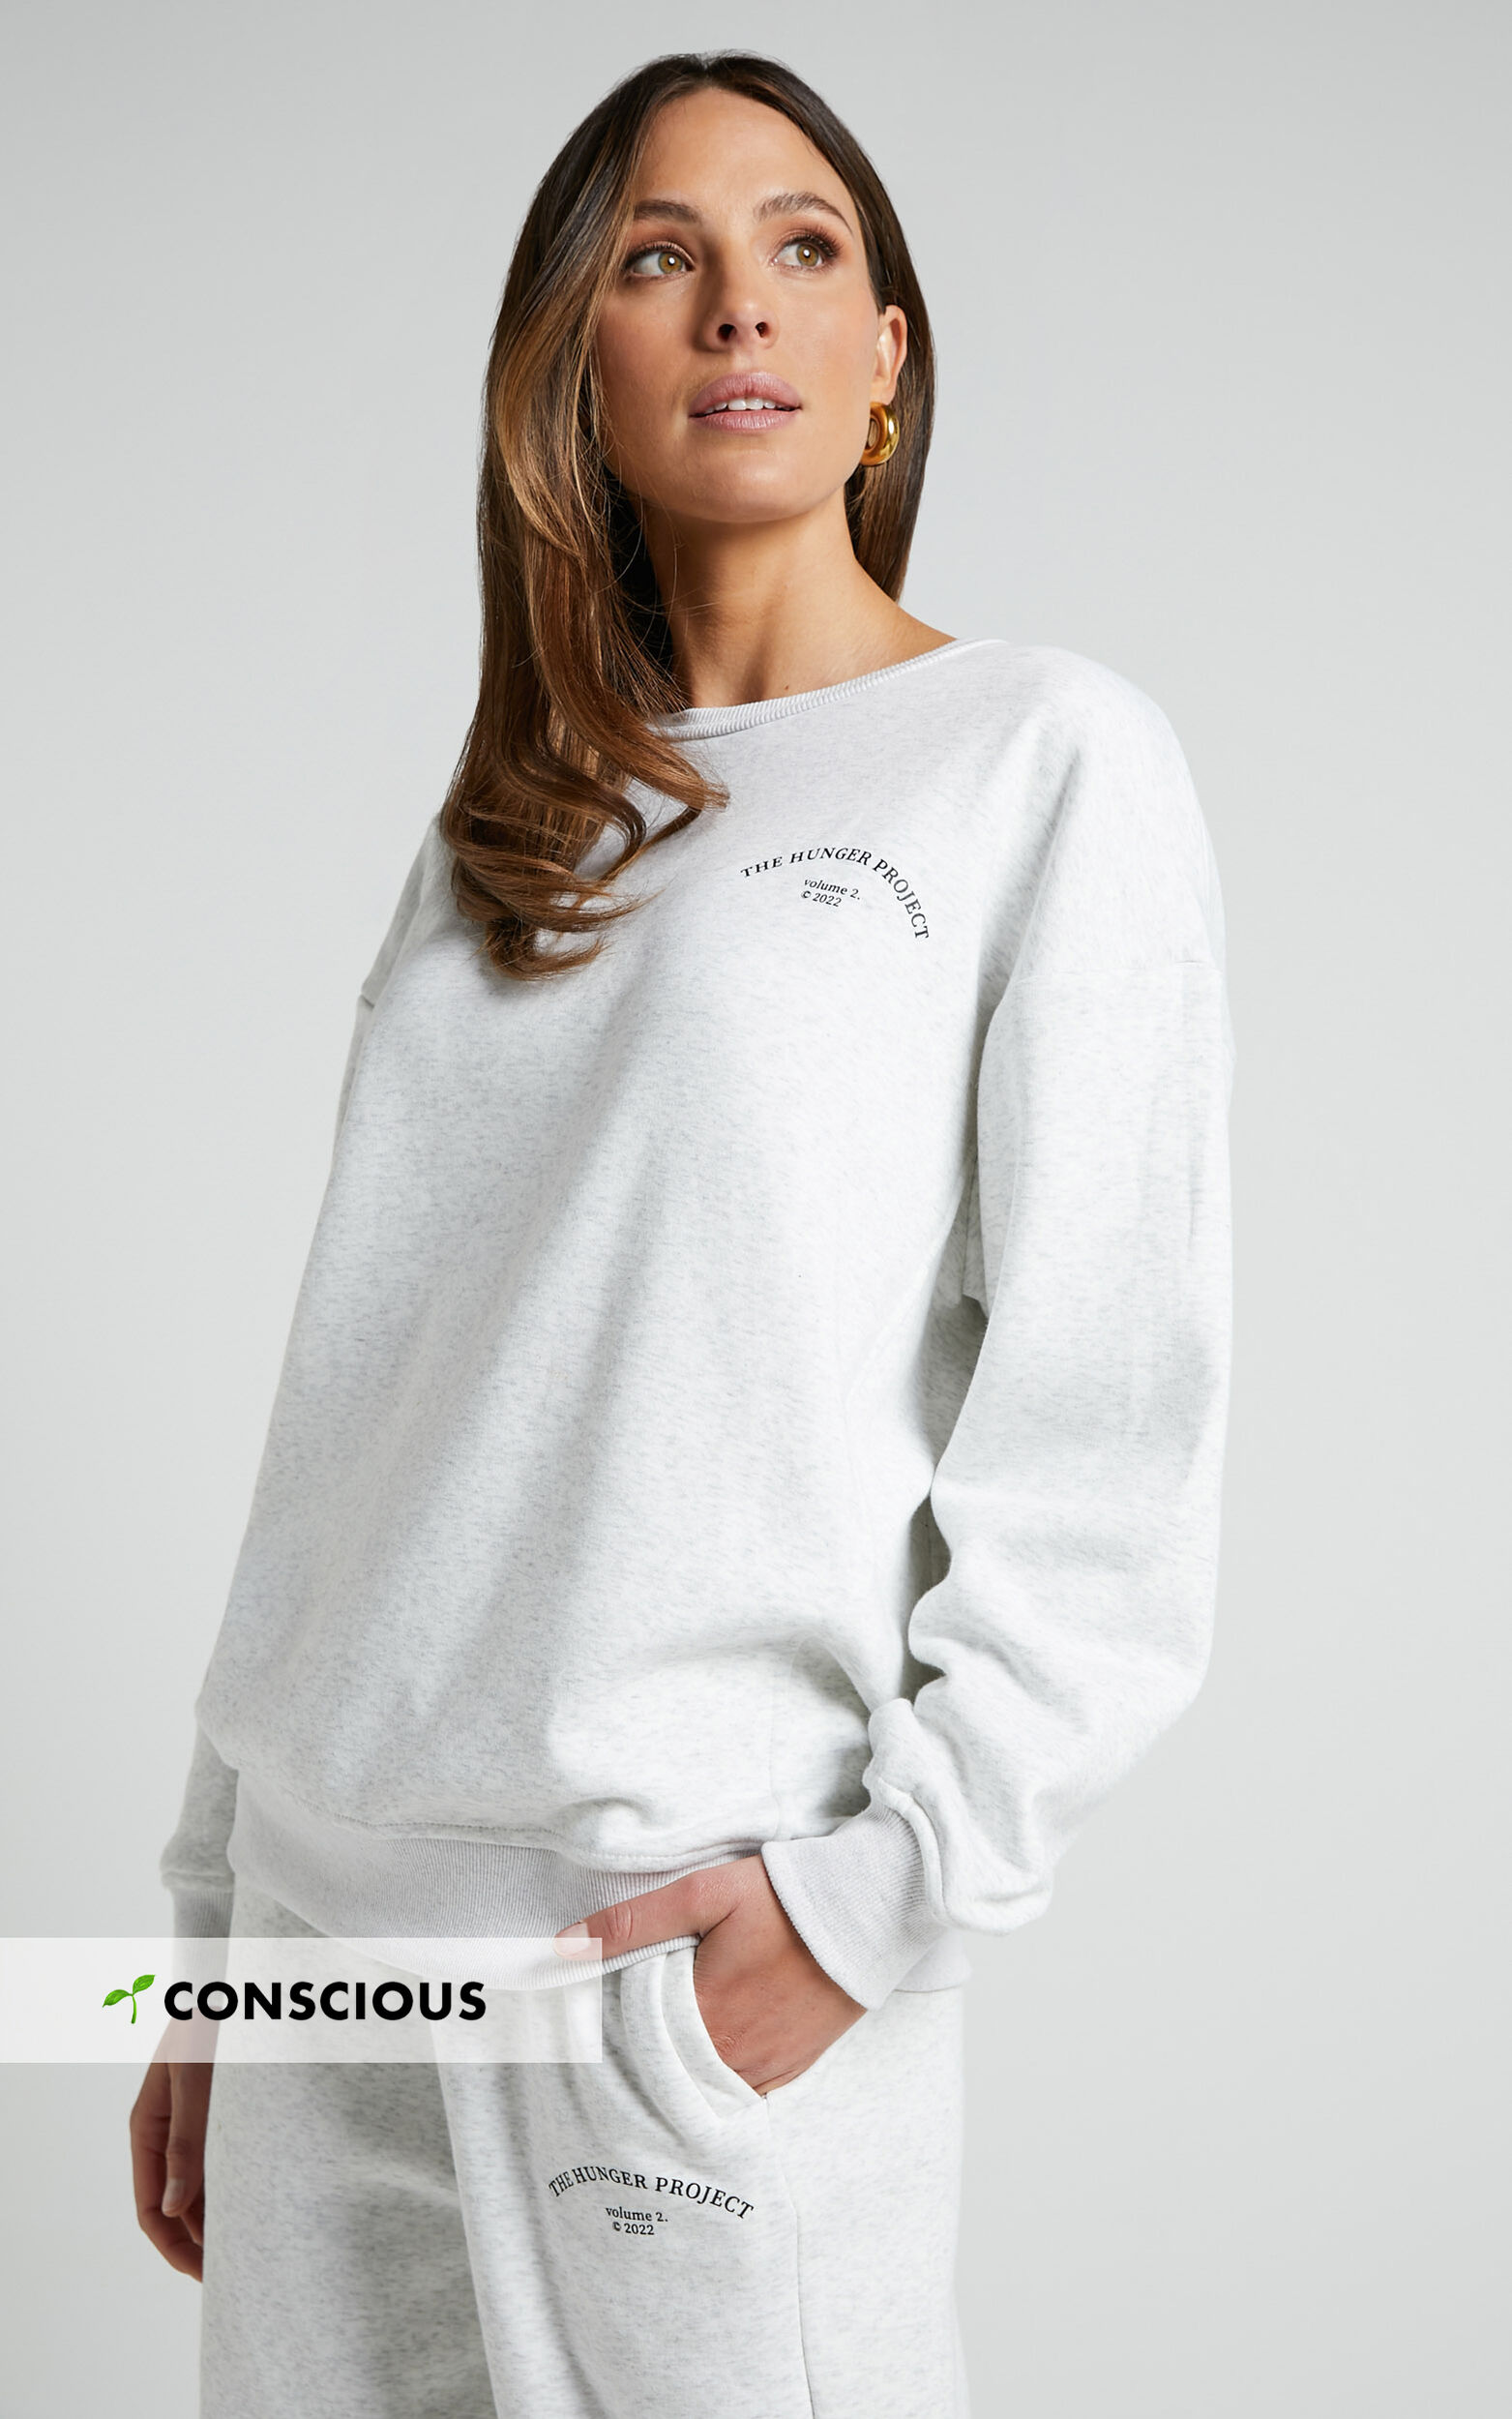 The Hunger Project x Showpo - THP Crew Neck Sweatshirt in White Marle - 04, WHT2